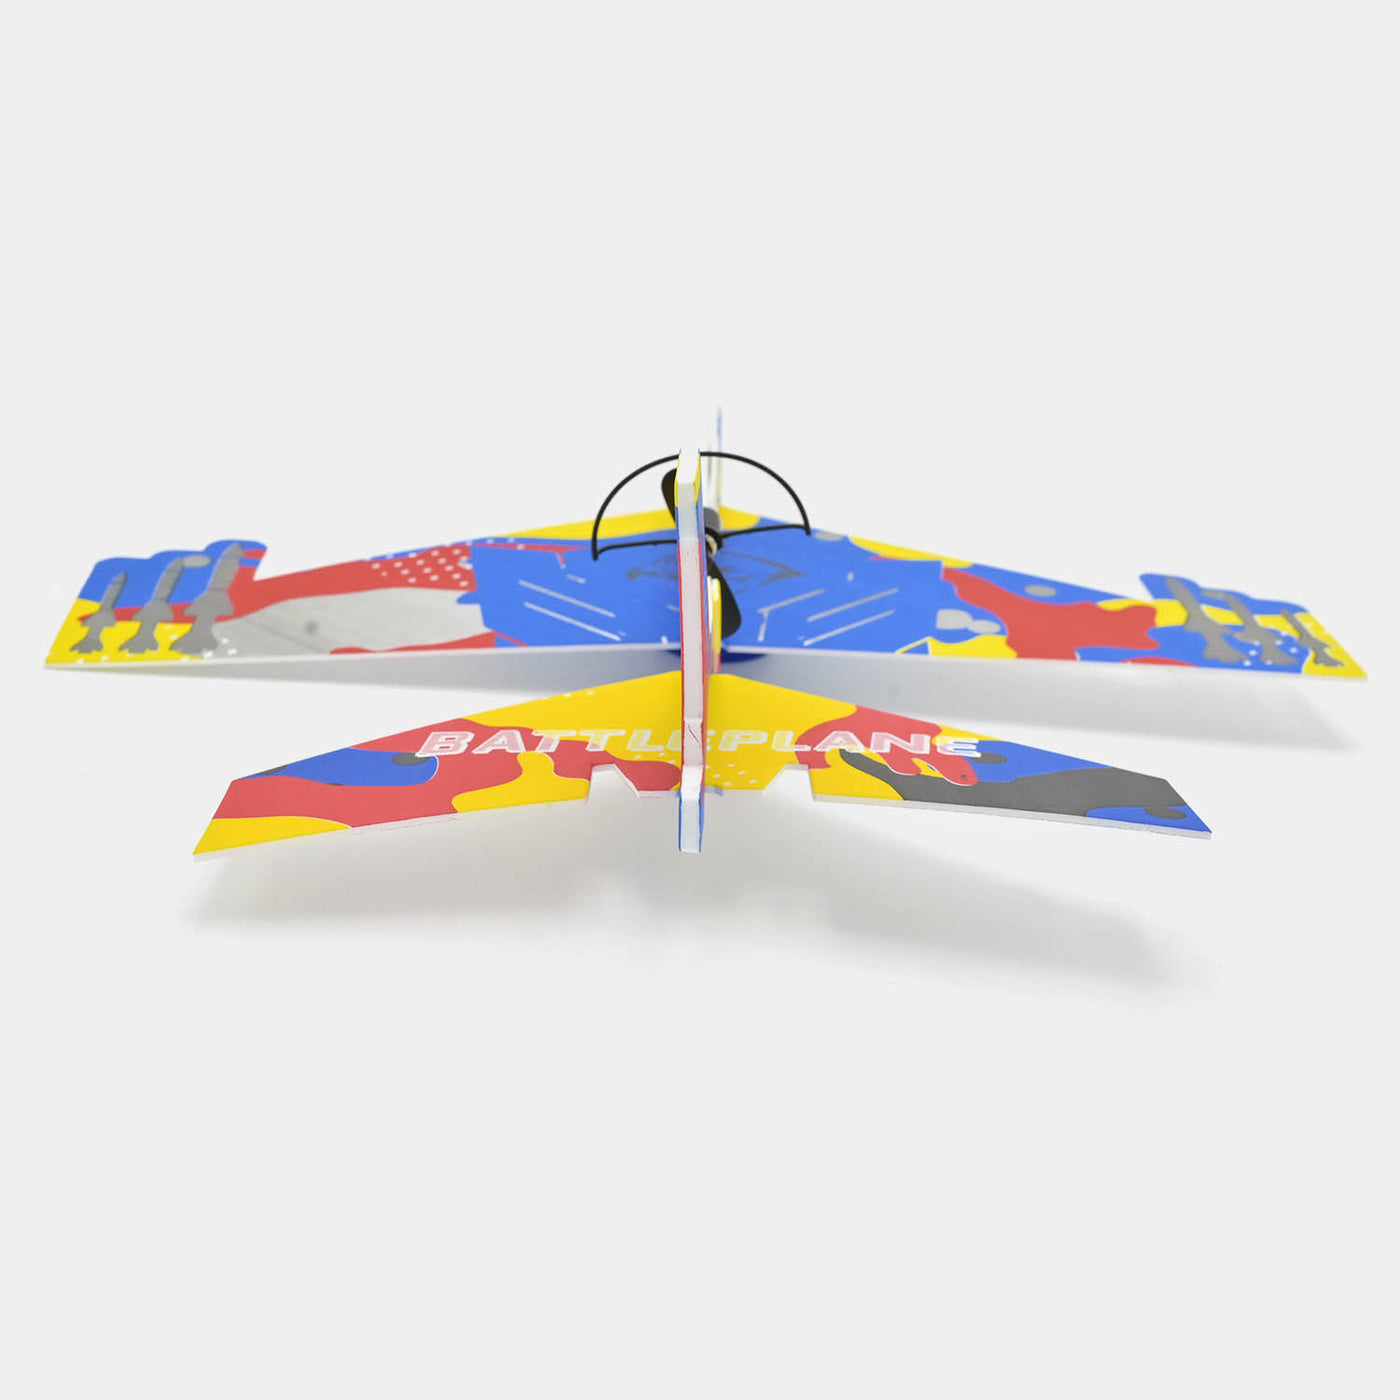 Rechargeable Foamy Glider Aircraft With Lights - Blue